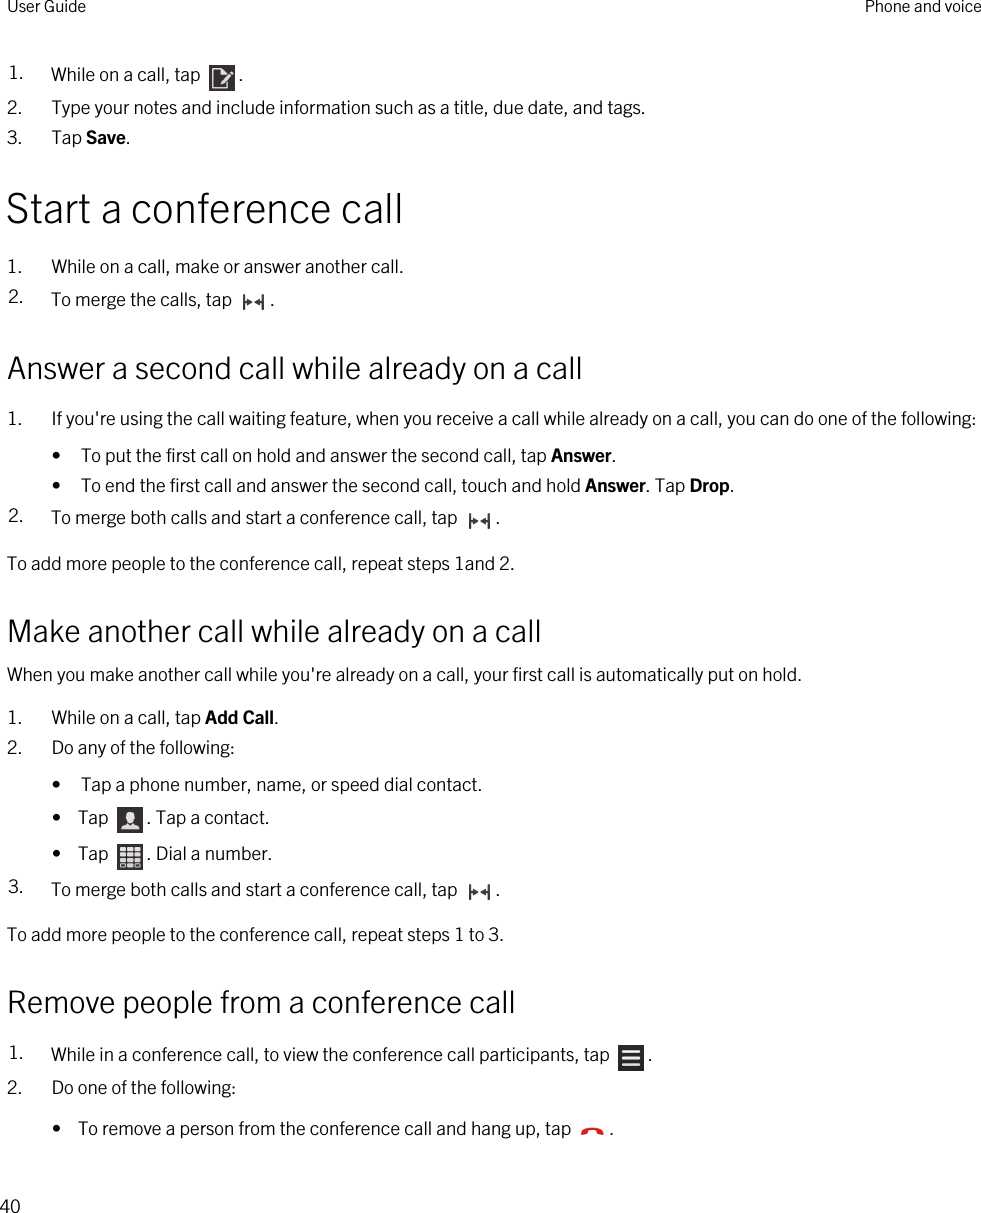 1. While on a call, tap  .2. Type your notes and include information such as a title, due date, and tags.3. Tap Save.Start a conference call1. While on a call, make or answer another call.2. To merge the calls, tap  .Answer a second call while already on a call1. If you&apos;re using the call waiting feature, when you receive a call while already on a call, you can do one of the following:• To put the first call on hold and answer the second call, tap Answer.• To end the first call and answer the second call, touch and hold Answer. Tap Drop.2. To merge both calls and start a conference call, tap  .To add more people to the conference call, repeat steps 1and 2.Make another call while already on a callWhen you make another call while you&apos;re already on a call, your first call is automatically put on hold.1. While on a call, tap Add Call.2. Do any of the following:• Tap a phone number, name, or speed dial contact.•  Tap  . Tap a contact.•  Tap  . Dial a number.3. To merge both calls and start a conference call, tap  .To add more people to the conference call, repeat steps 1 to 3.Remove people from a conference call1. While in a conference call, to view the conference call participants, tap  . 2. Do one of the following:•  To remove a person from the conference call and hang up, tap  .User Guide Phone and voice40